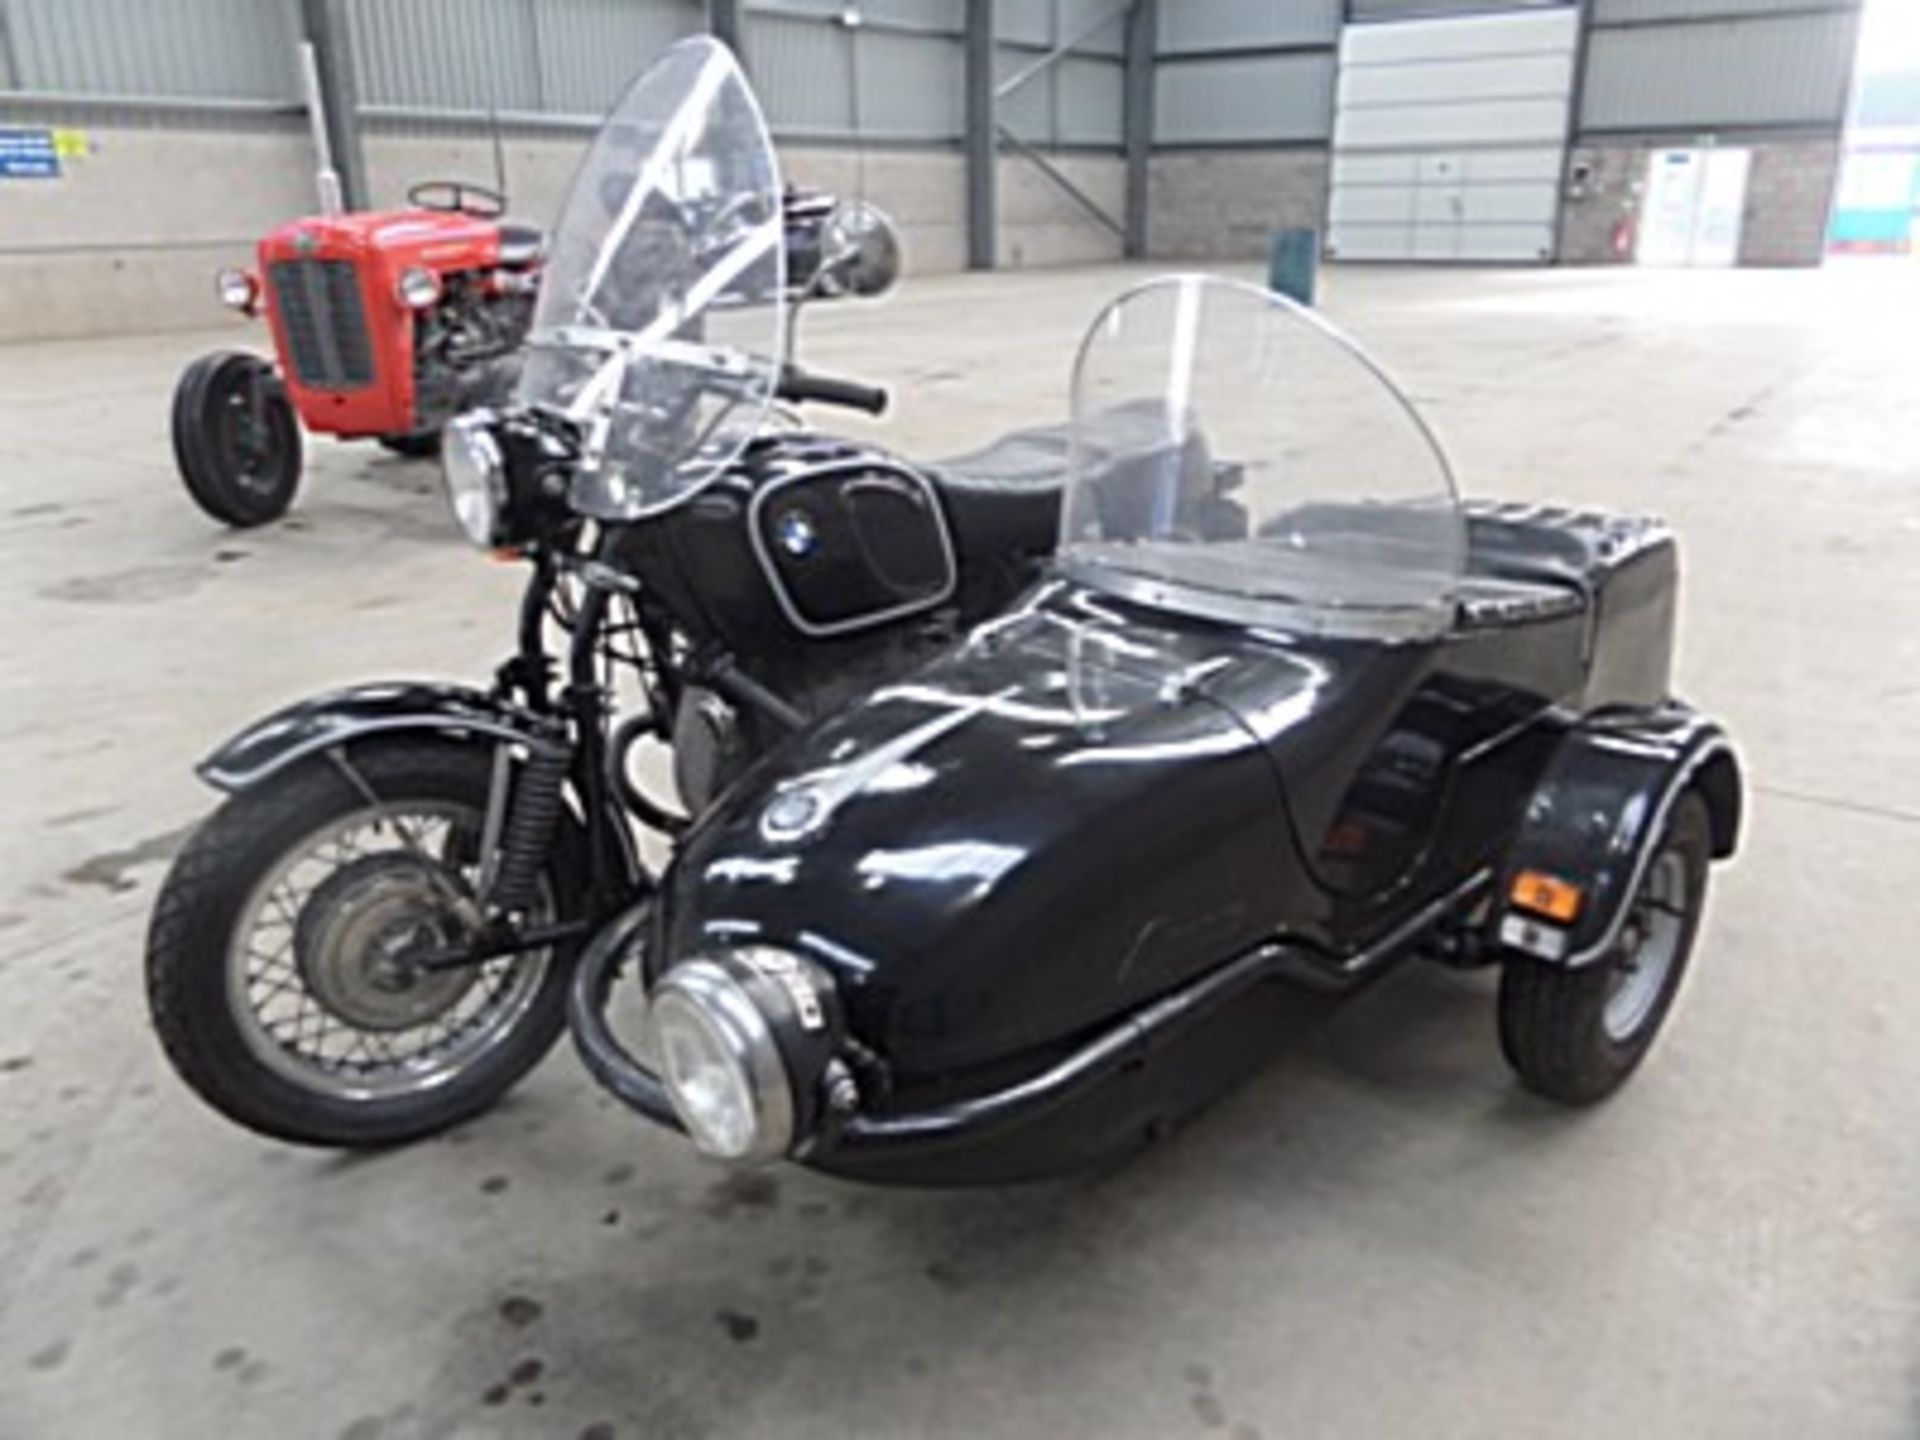 BMW, R75/5 COMBO - 745cc, Chassis number 4007988 - MOT tested until January 2017 ESTIMATE £3000 - £ - Image 7 of 11